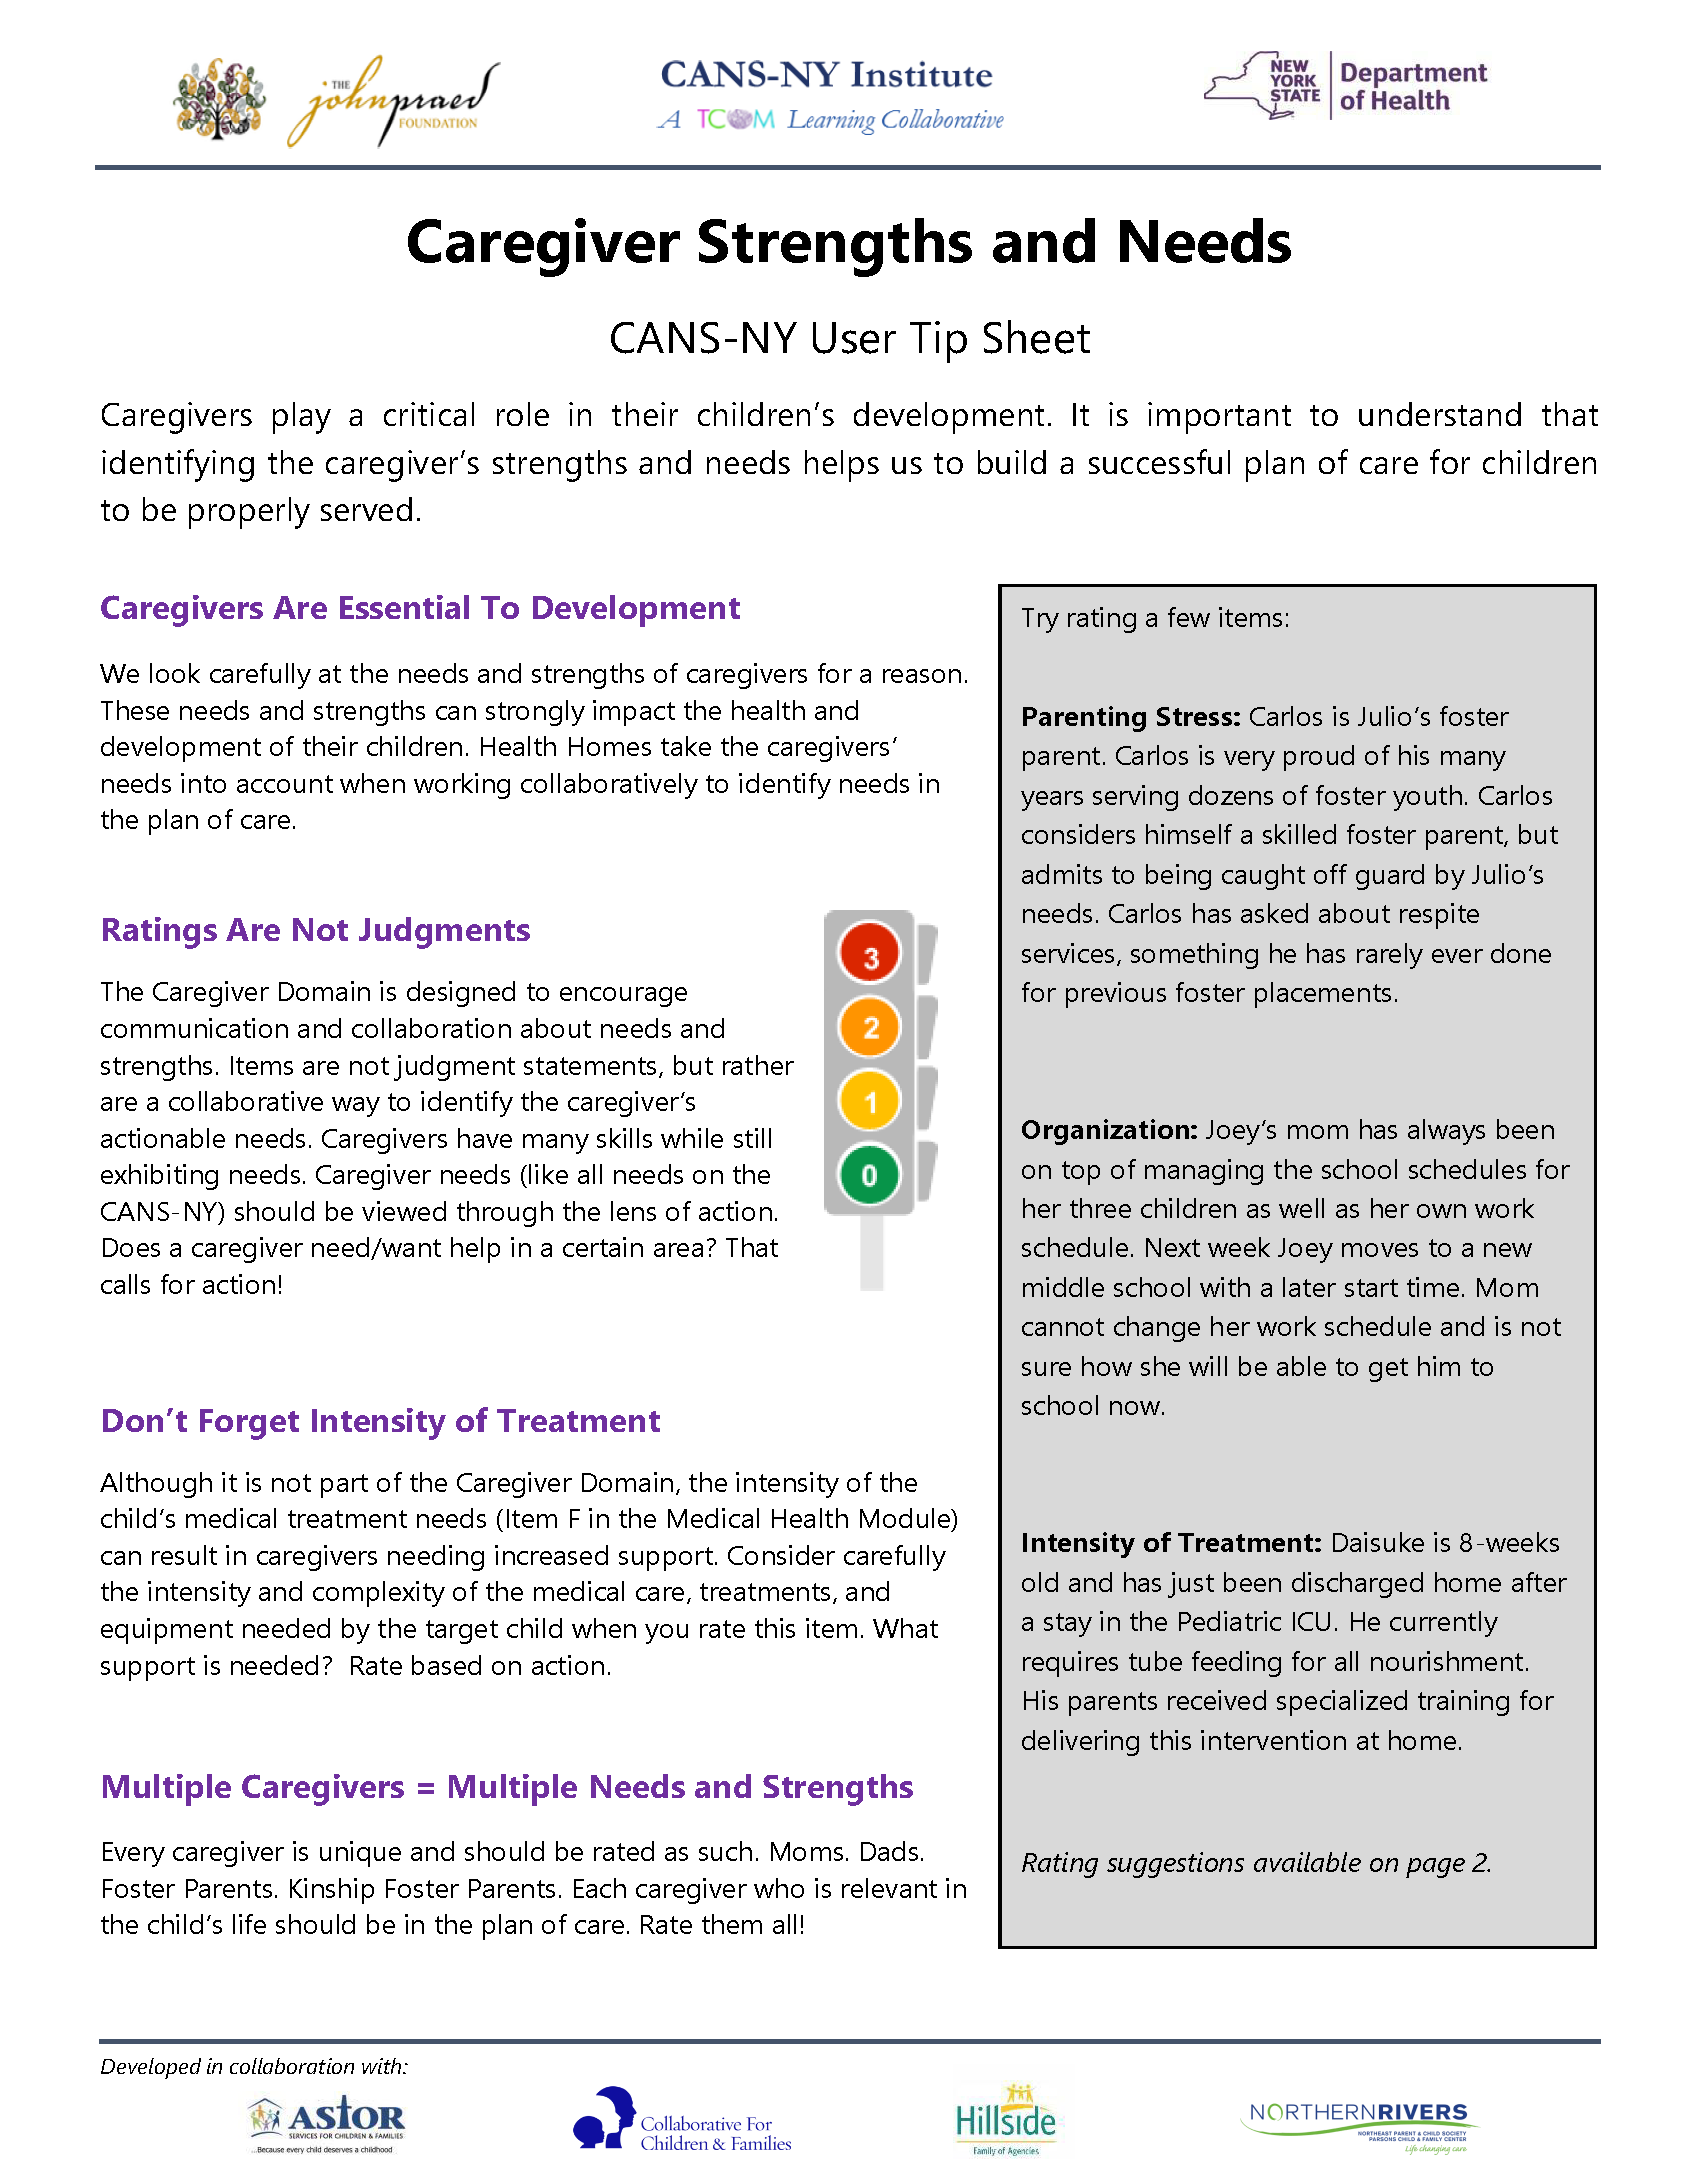 tip-sheet_caregiver-strengths-and-needs_final-word_Page_1.png